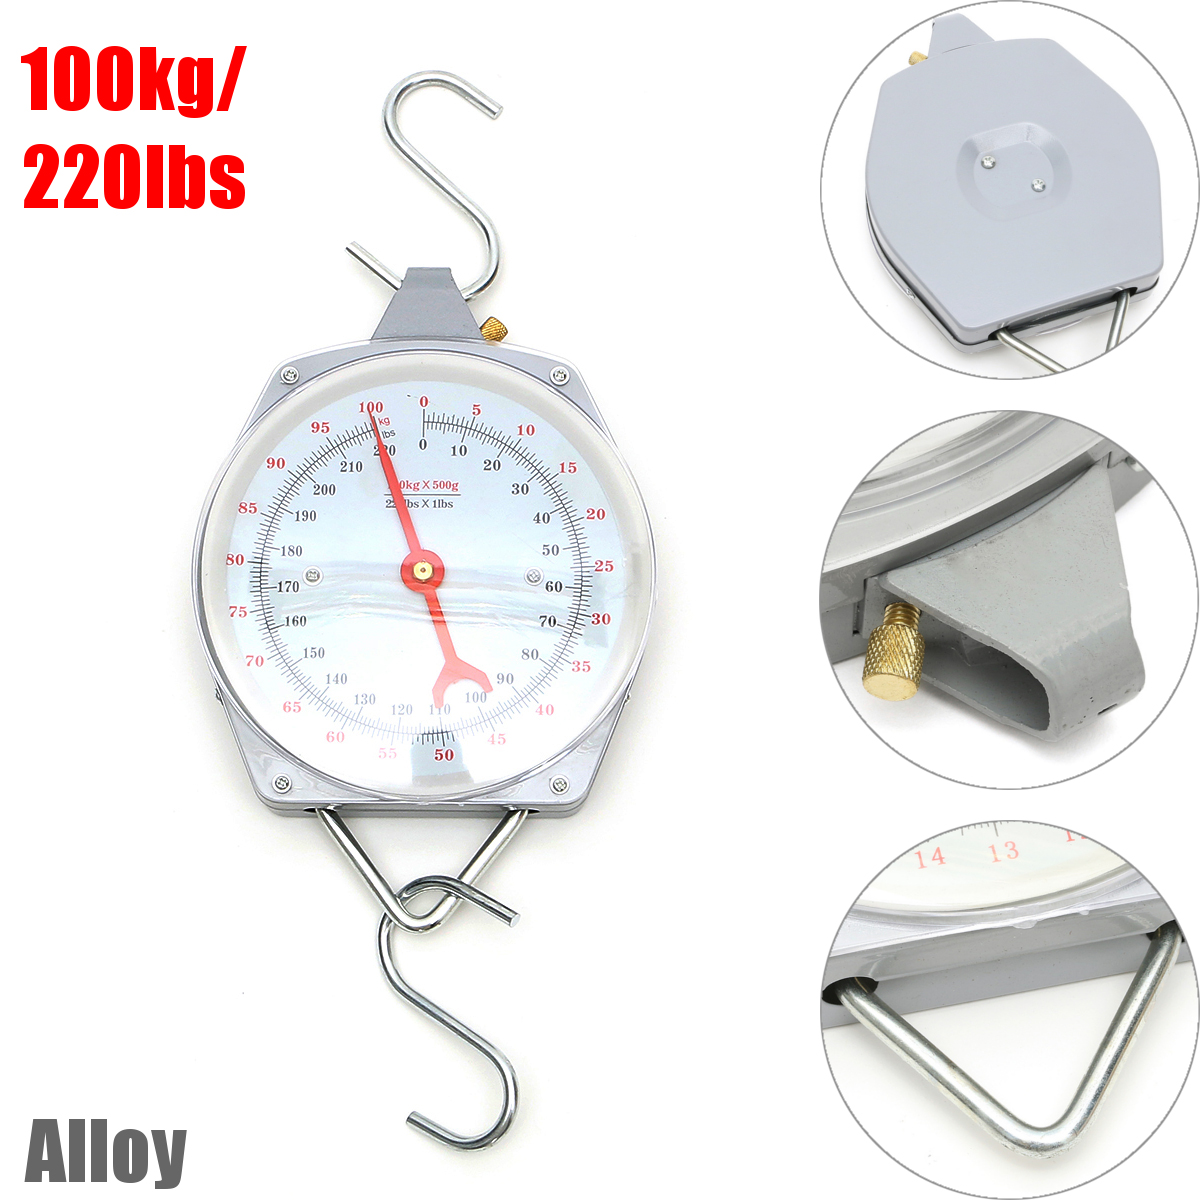 100kg220lbs-Clockface-Hanging-Scale-Weighing-Butchering-with-Hook-1156011-1